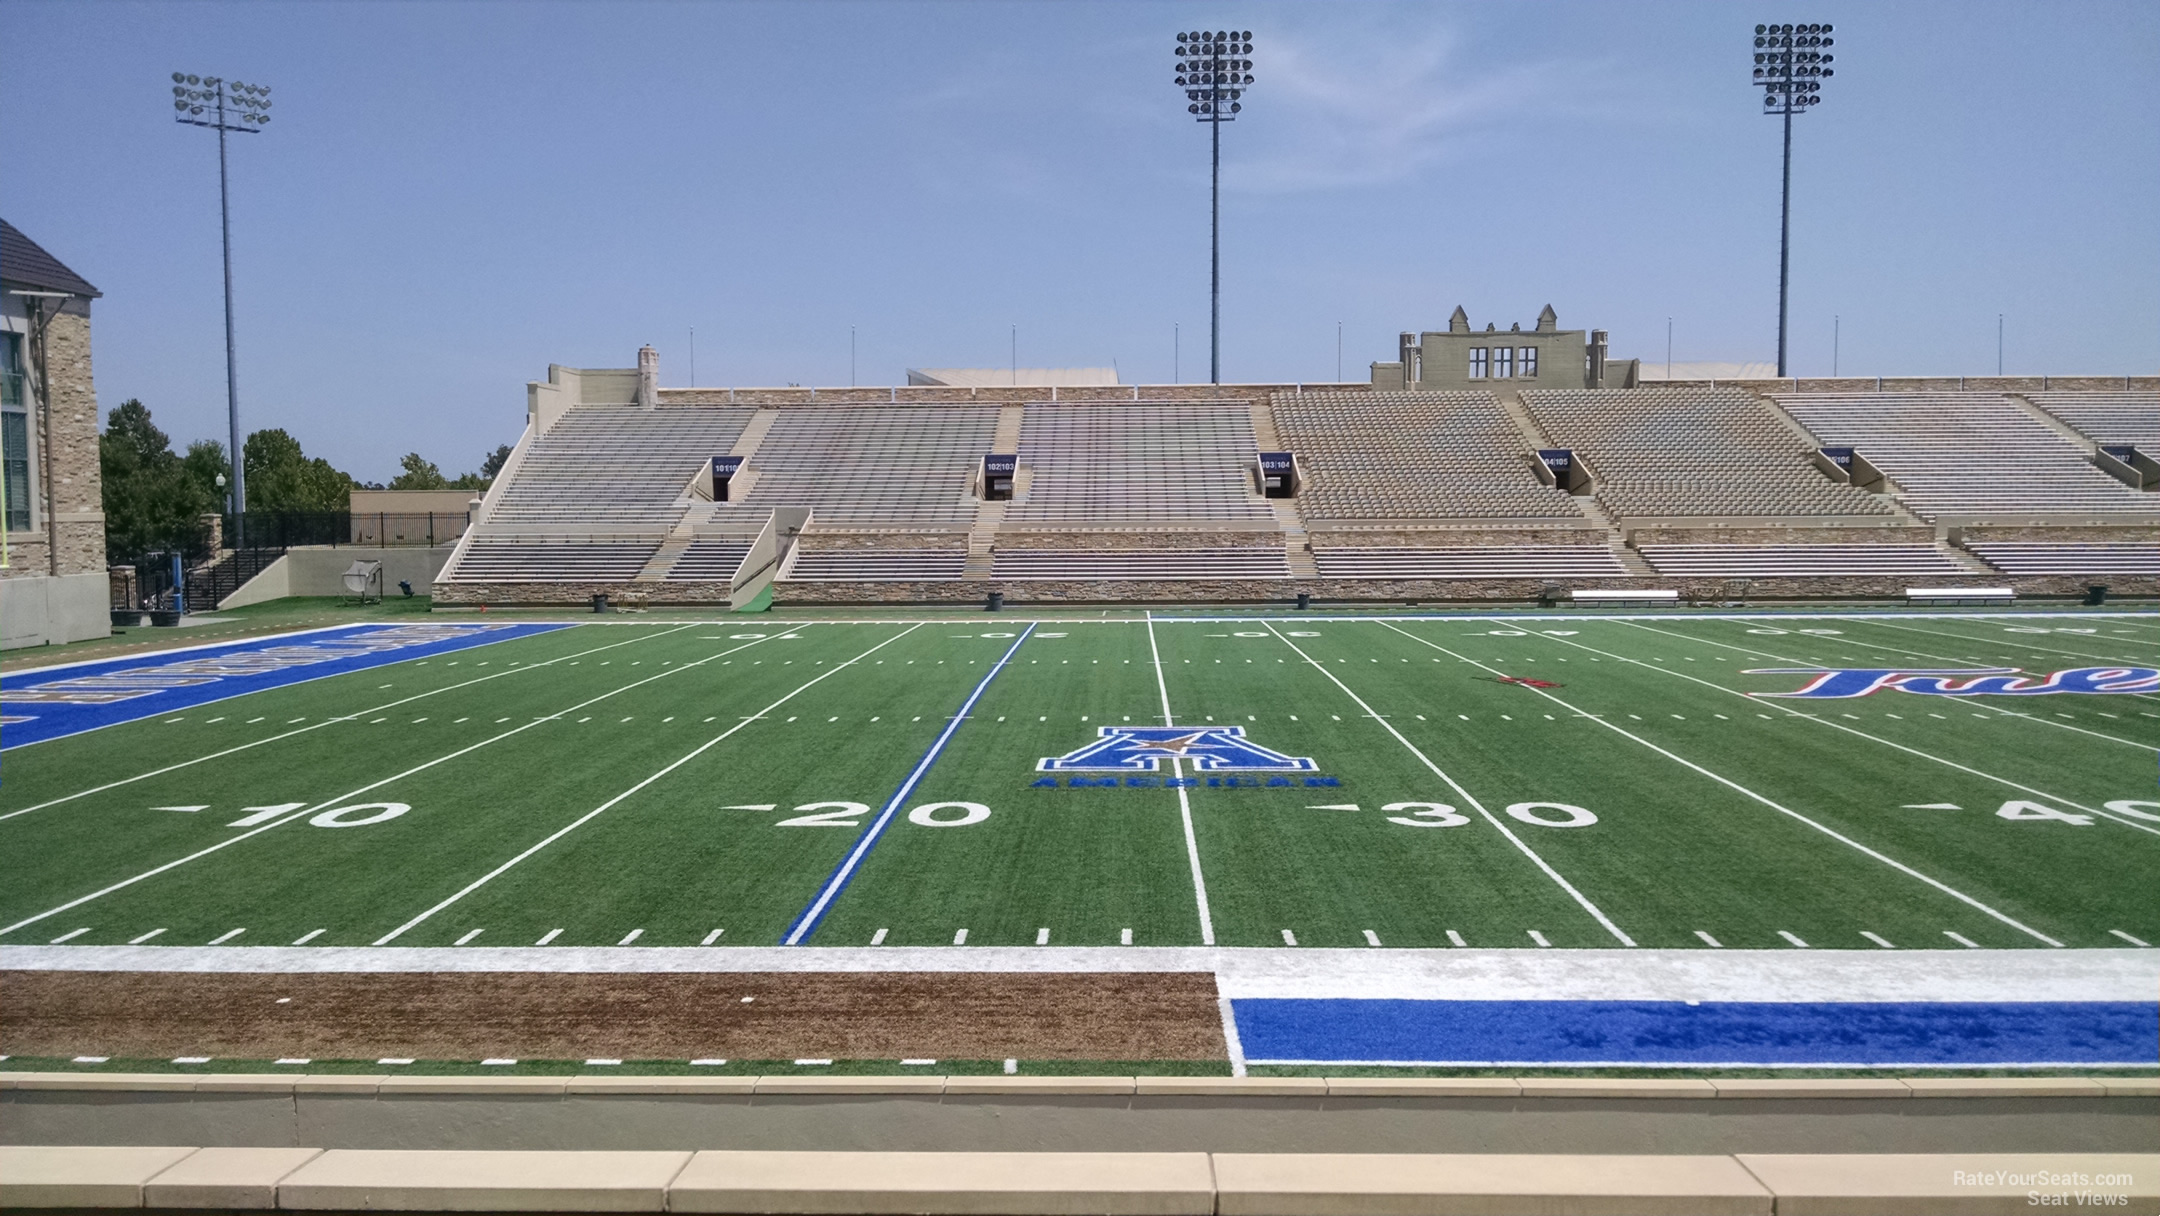 section 119, row 15 seat view  - h.a. chapman stadium